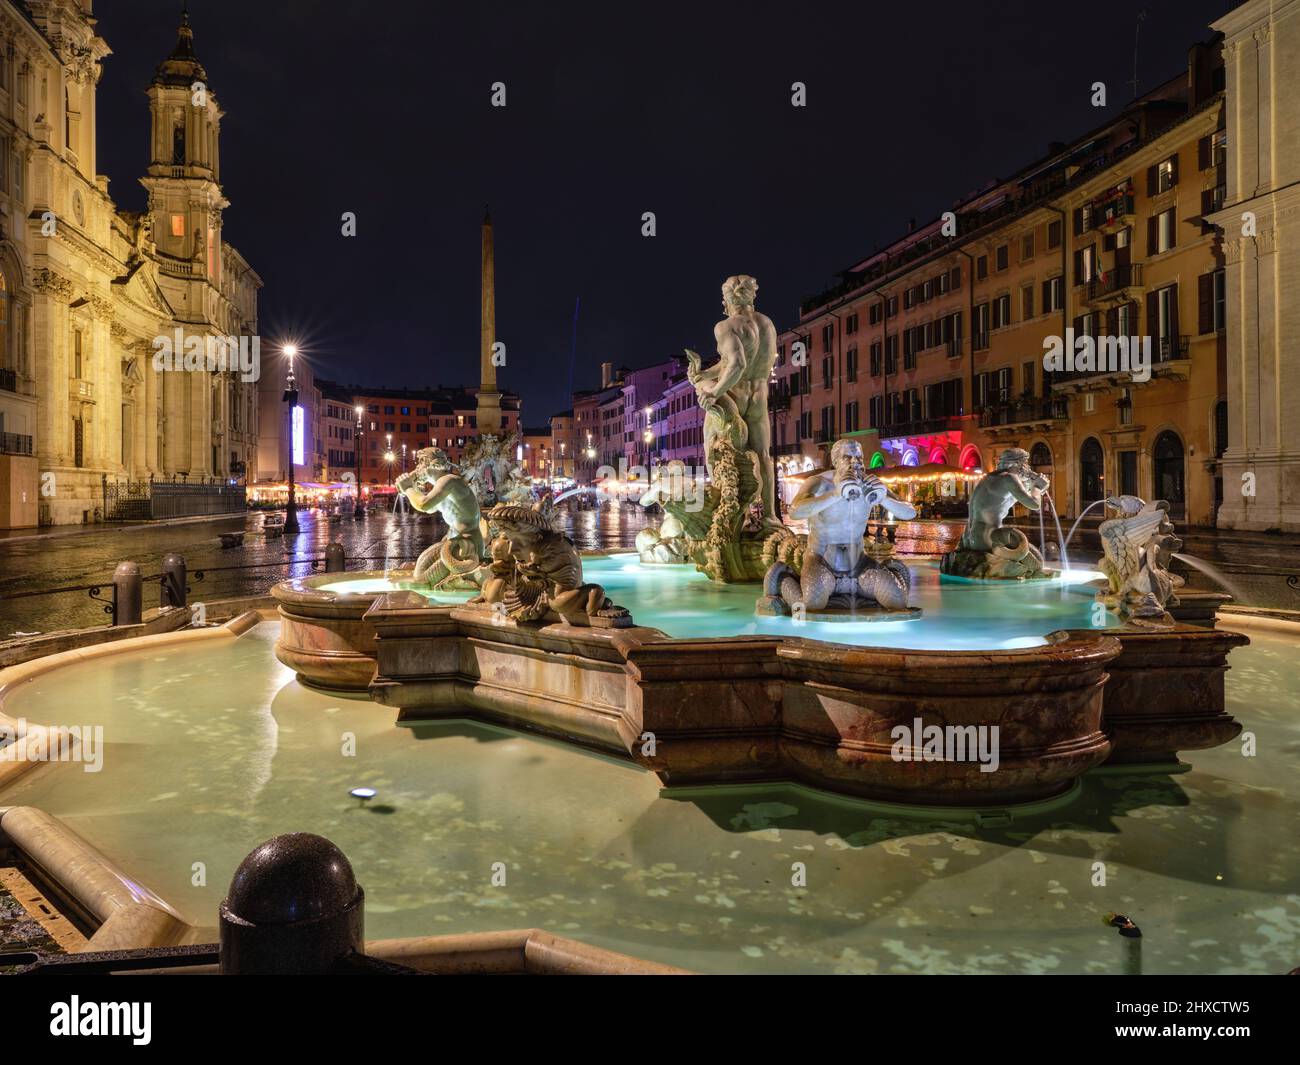 The Fountain of the Moors in Piazza Navona, Rome Stock Photo - Alamy